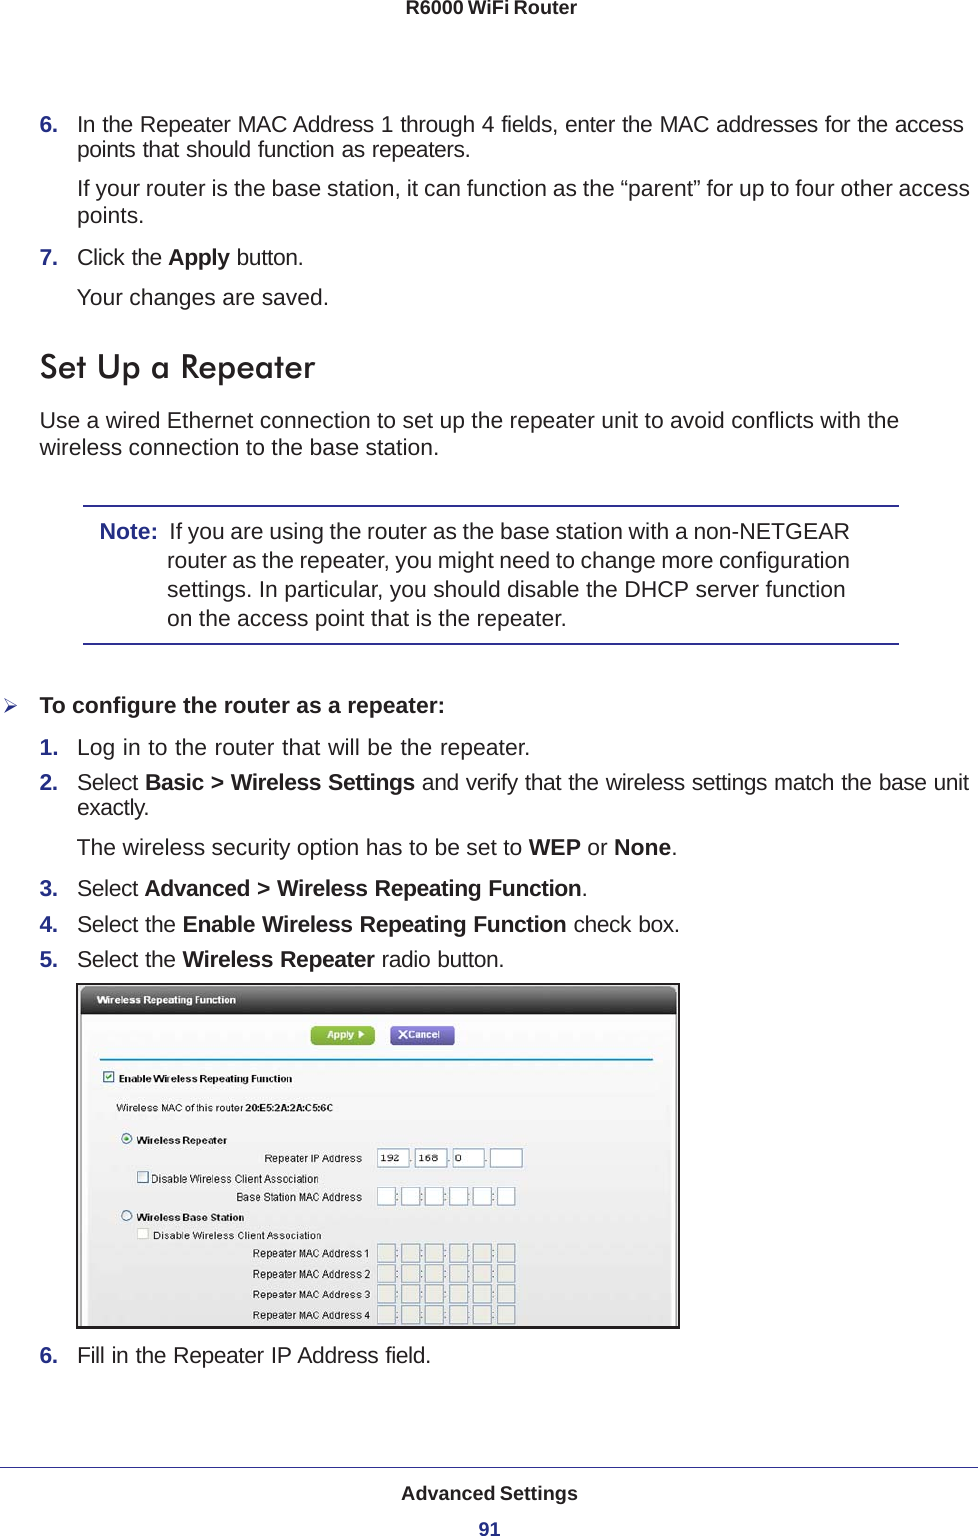 Advanced Settings91 R6000 WiFi Router6.  In the Repeater MAC Address 1 through 4 fields, enter the MAC addresses for the access points that should function as repeaters.If your router is the base station, it can function as the “parent” for up to four other access points.7.  Click the Apply button. Your changes are saved.Set Up a RepeaterUse a wired Ethernet connection to set up the repeater unit to avoid conflicts with the wireless connection to the base station.Note:  If you are using the router as the base station with a non-NETGEAR router as the repeater, you might need to change more configuration settings. In particular, you should disable the DHCP server function on the access point that is the repeater.To configure the router as a repeater:1.  Log in to the router that will be the repeater. 2.  Select Basic &gt; Wireless Settings and verify that the wireless settings match the base unit exactly. The wireless security option has to be set to WEP or None.3.  Select Advanced &gt; Wireless Repeating Function.4.  Select the Enable Wireless Repeating Function check box.5.  Select the Wireless Repeater radio button.6.  Fill in the Repeater IP Address field. 